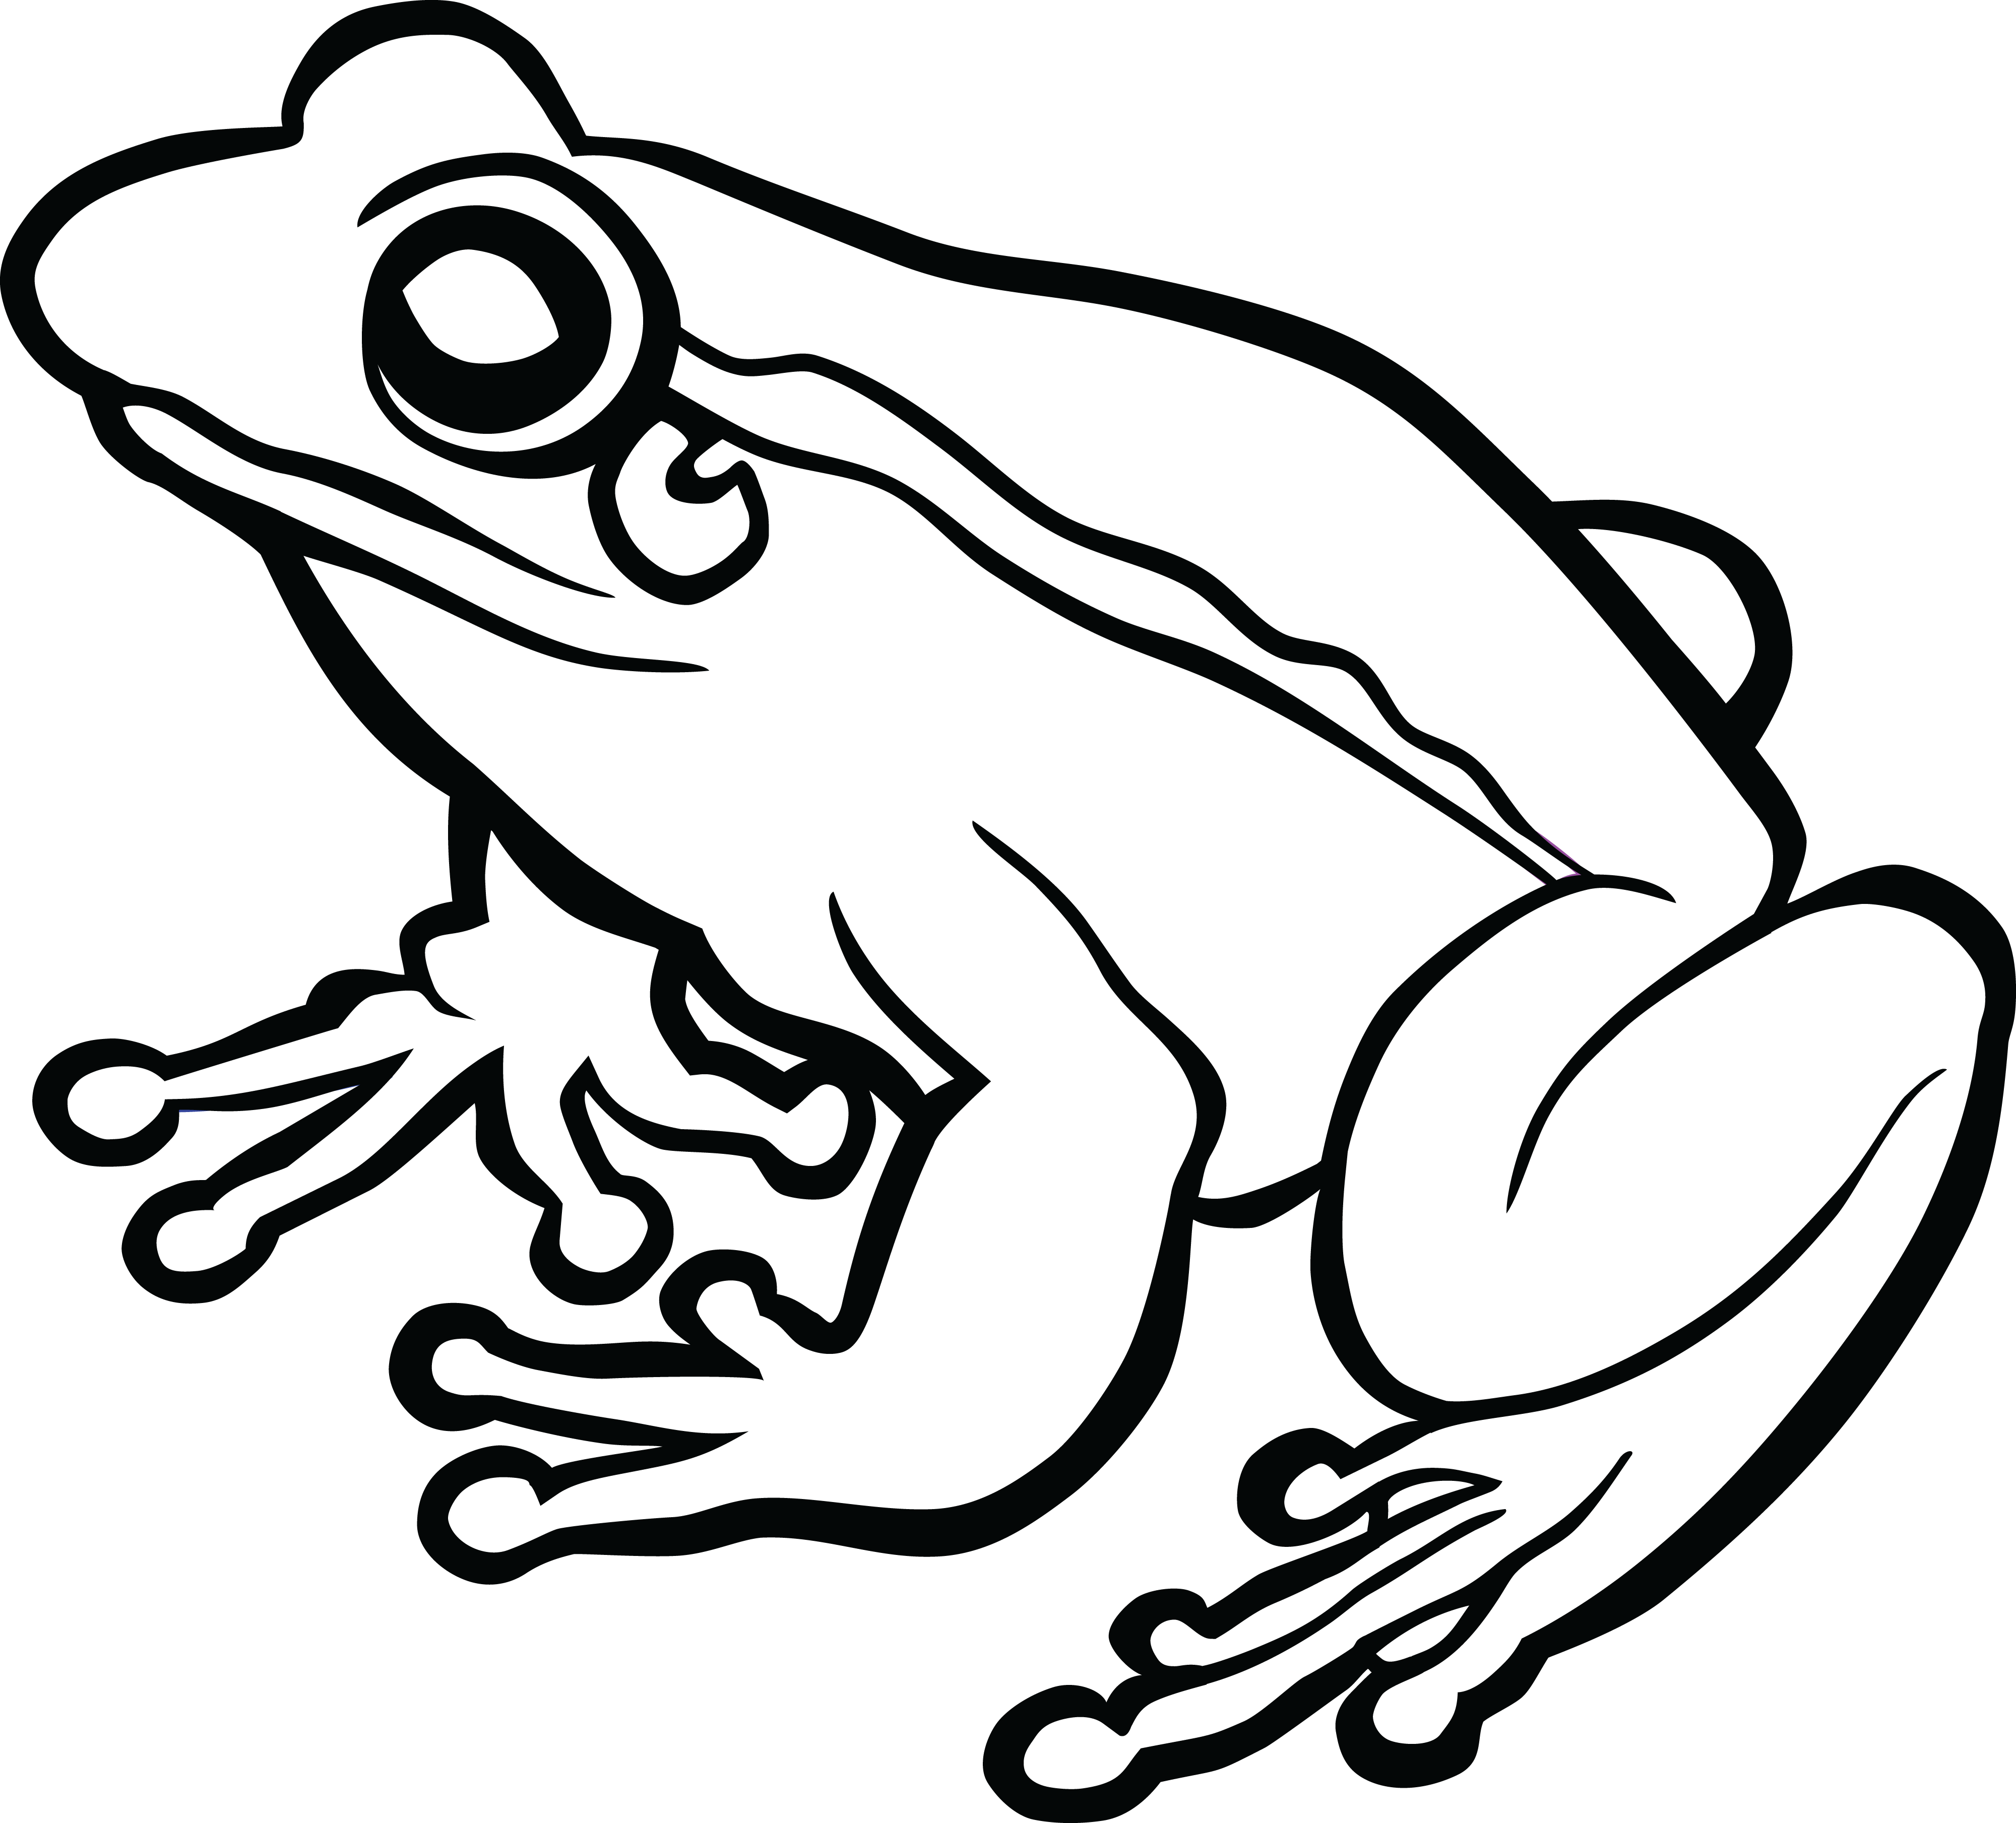 Frogs clipart black.